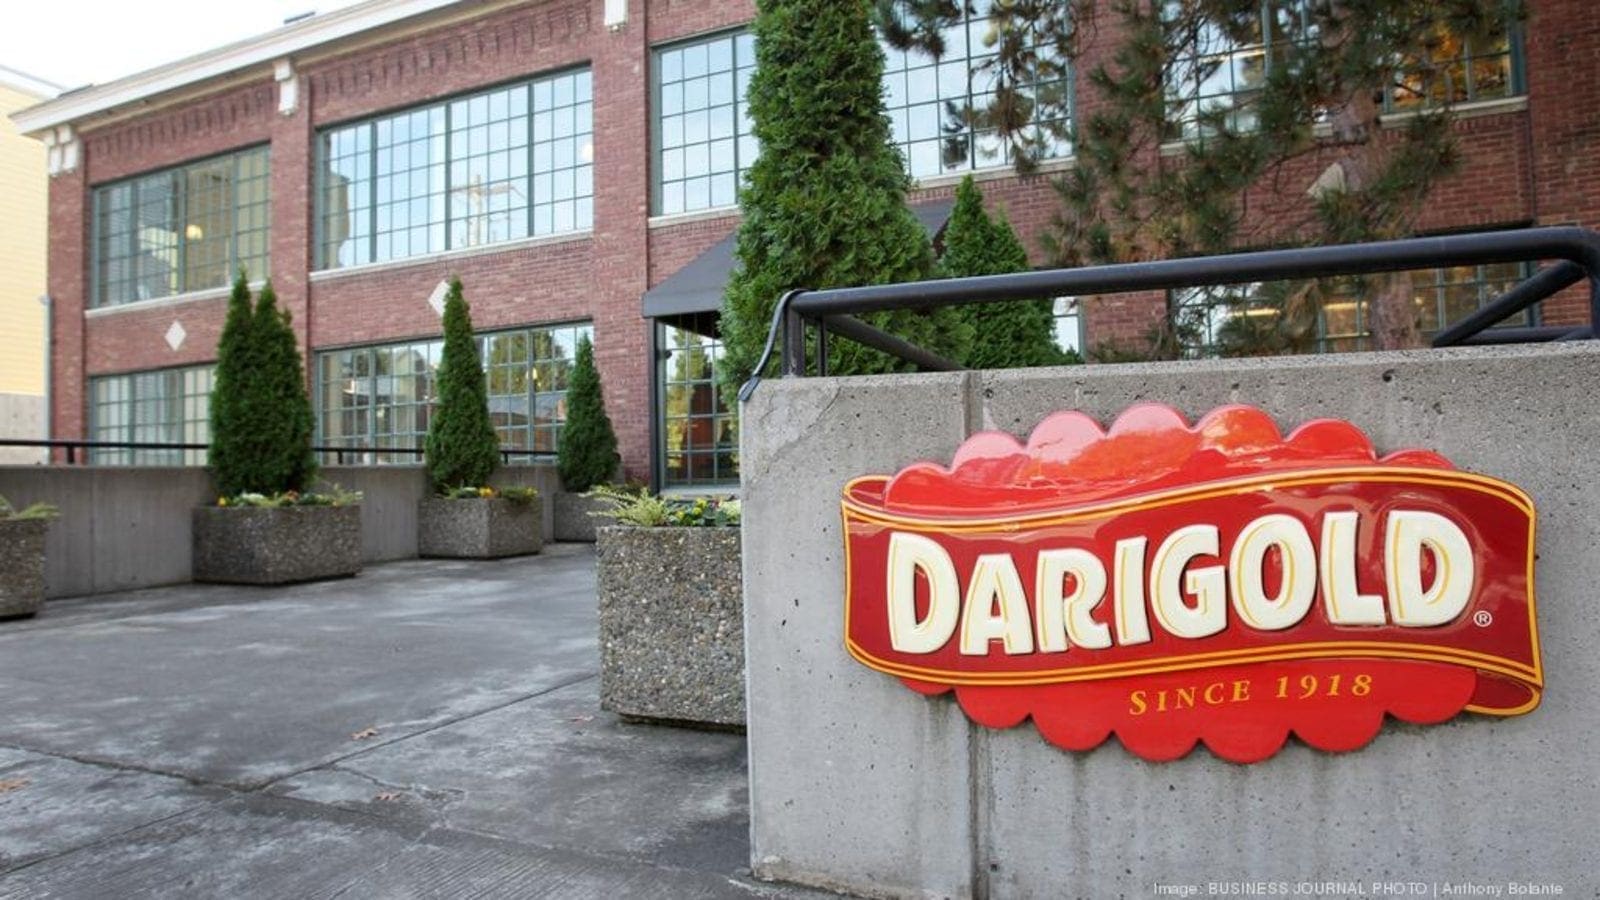 Darigold invests in new US$500m low carbon dairy facility to step closer to net zero emissions